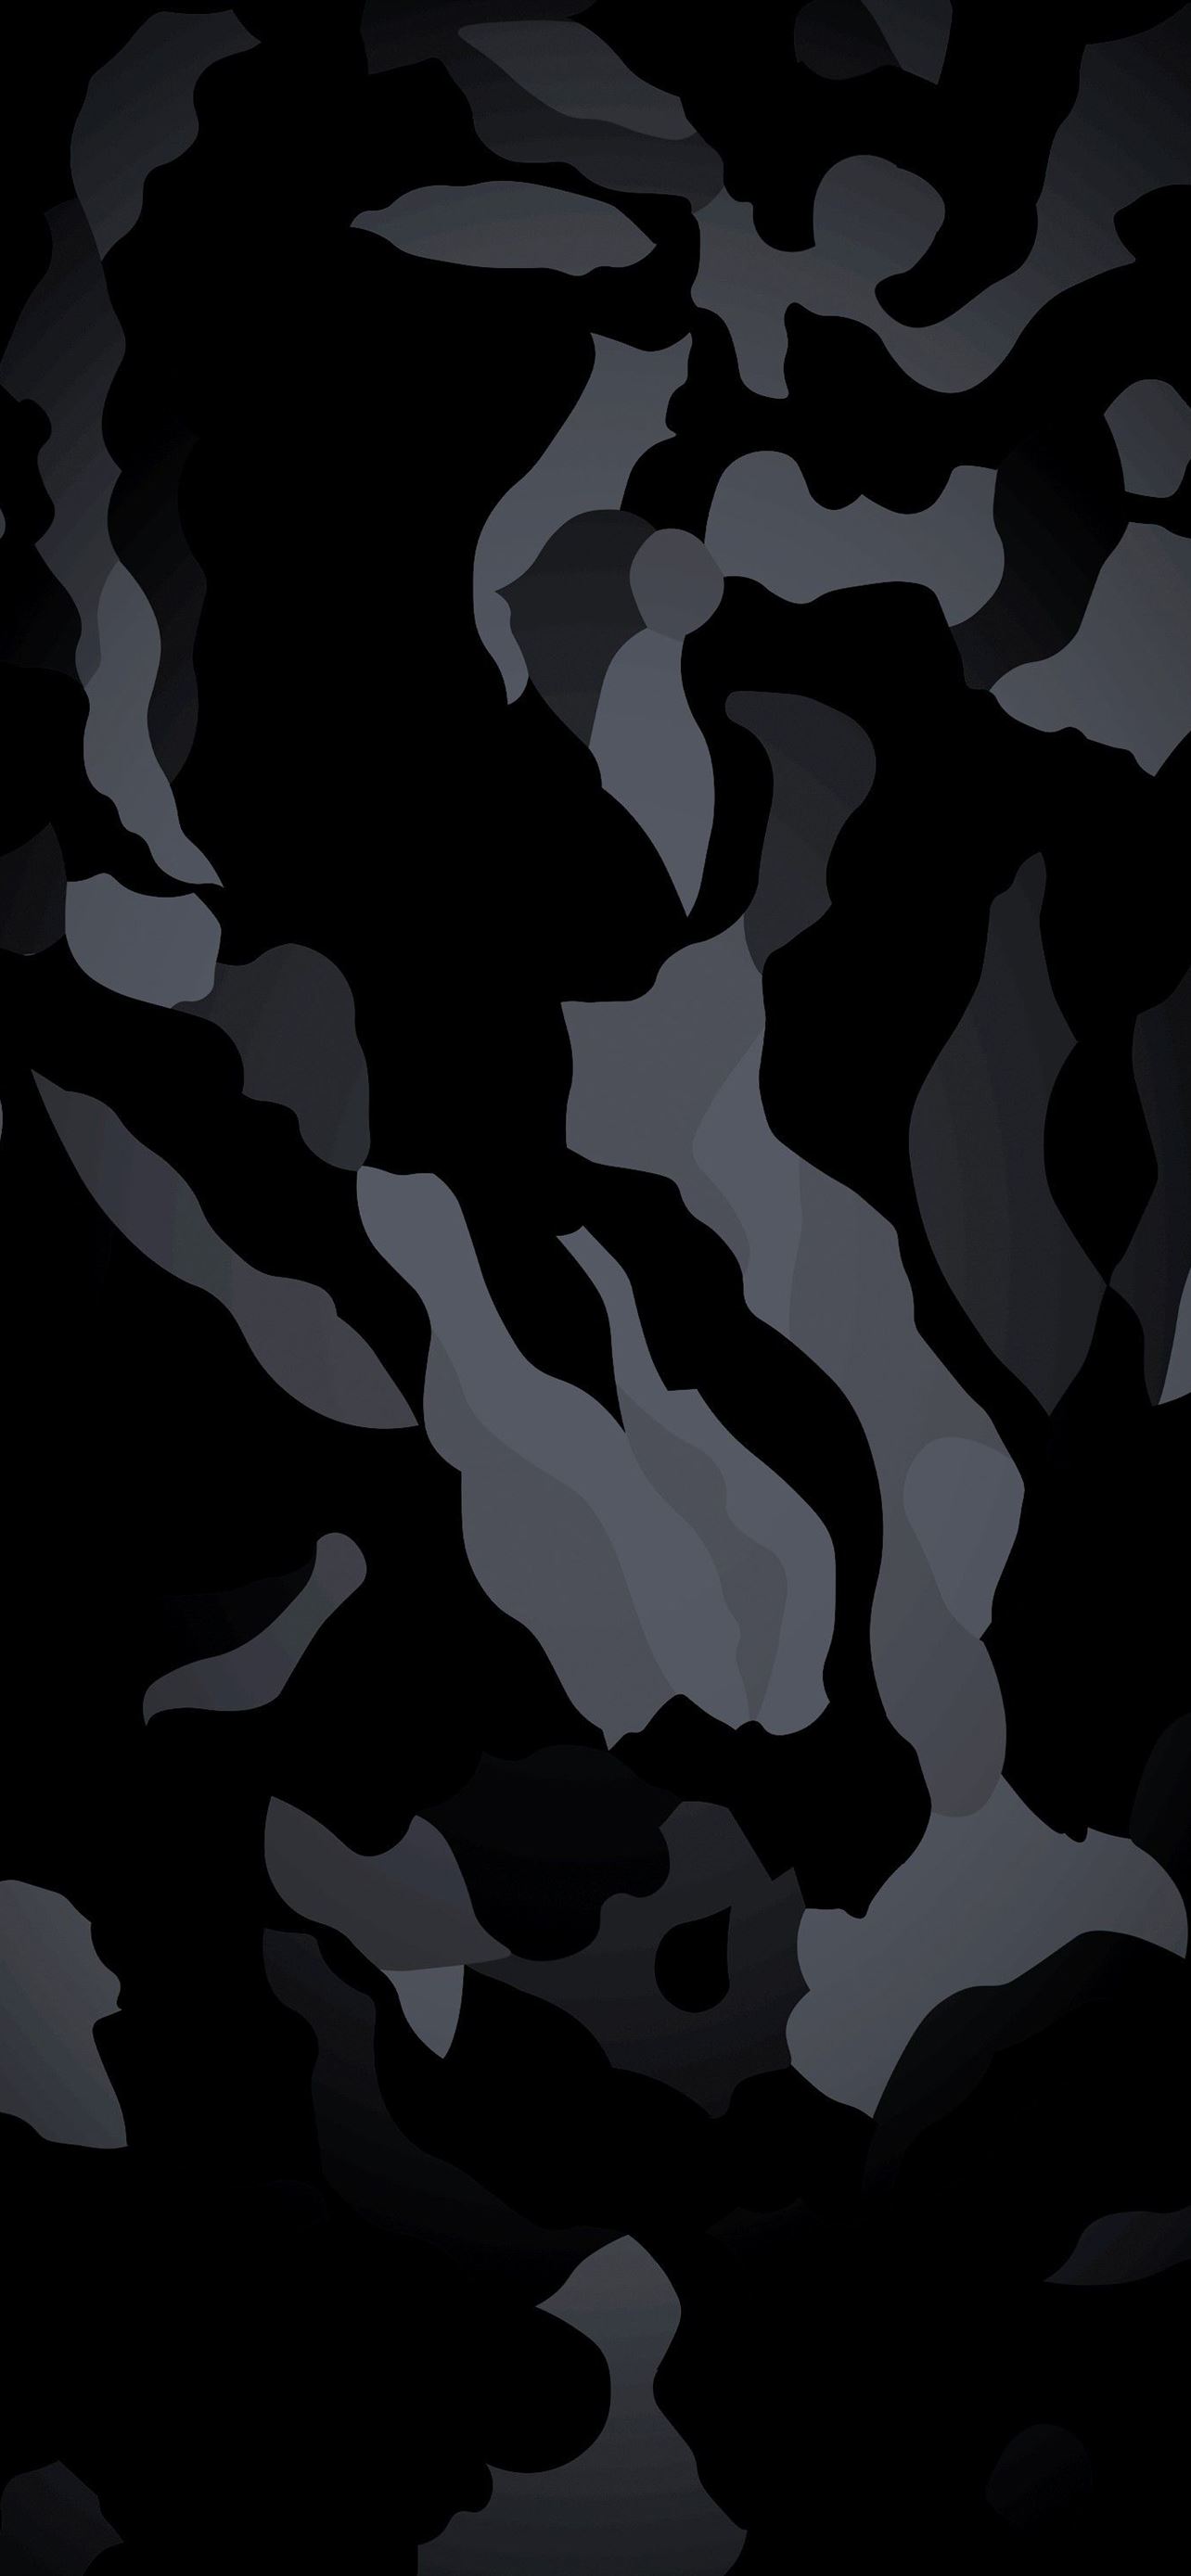 Black Pattern Military camouflage Camouflage Desig. iPhone 12 Wallpaper Free Download